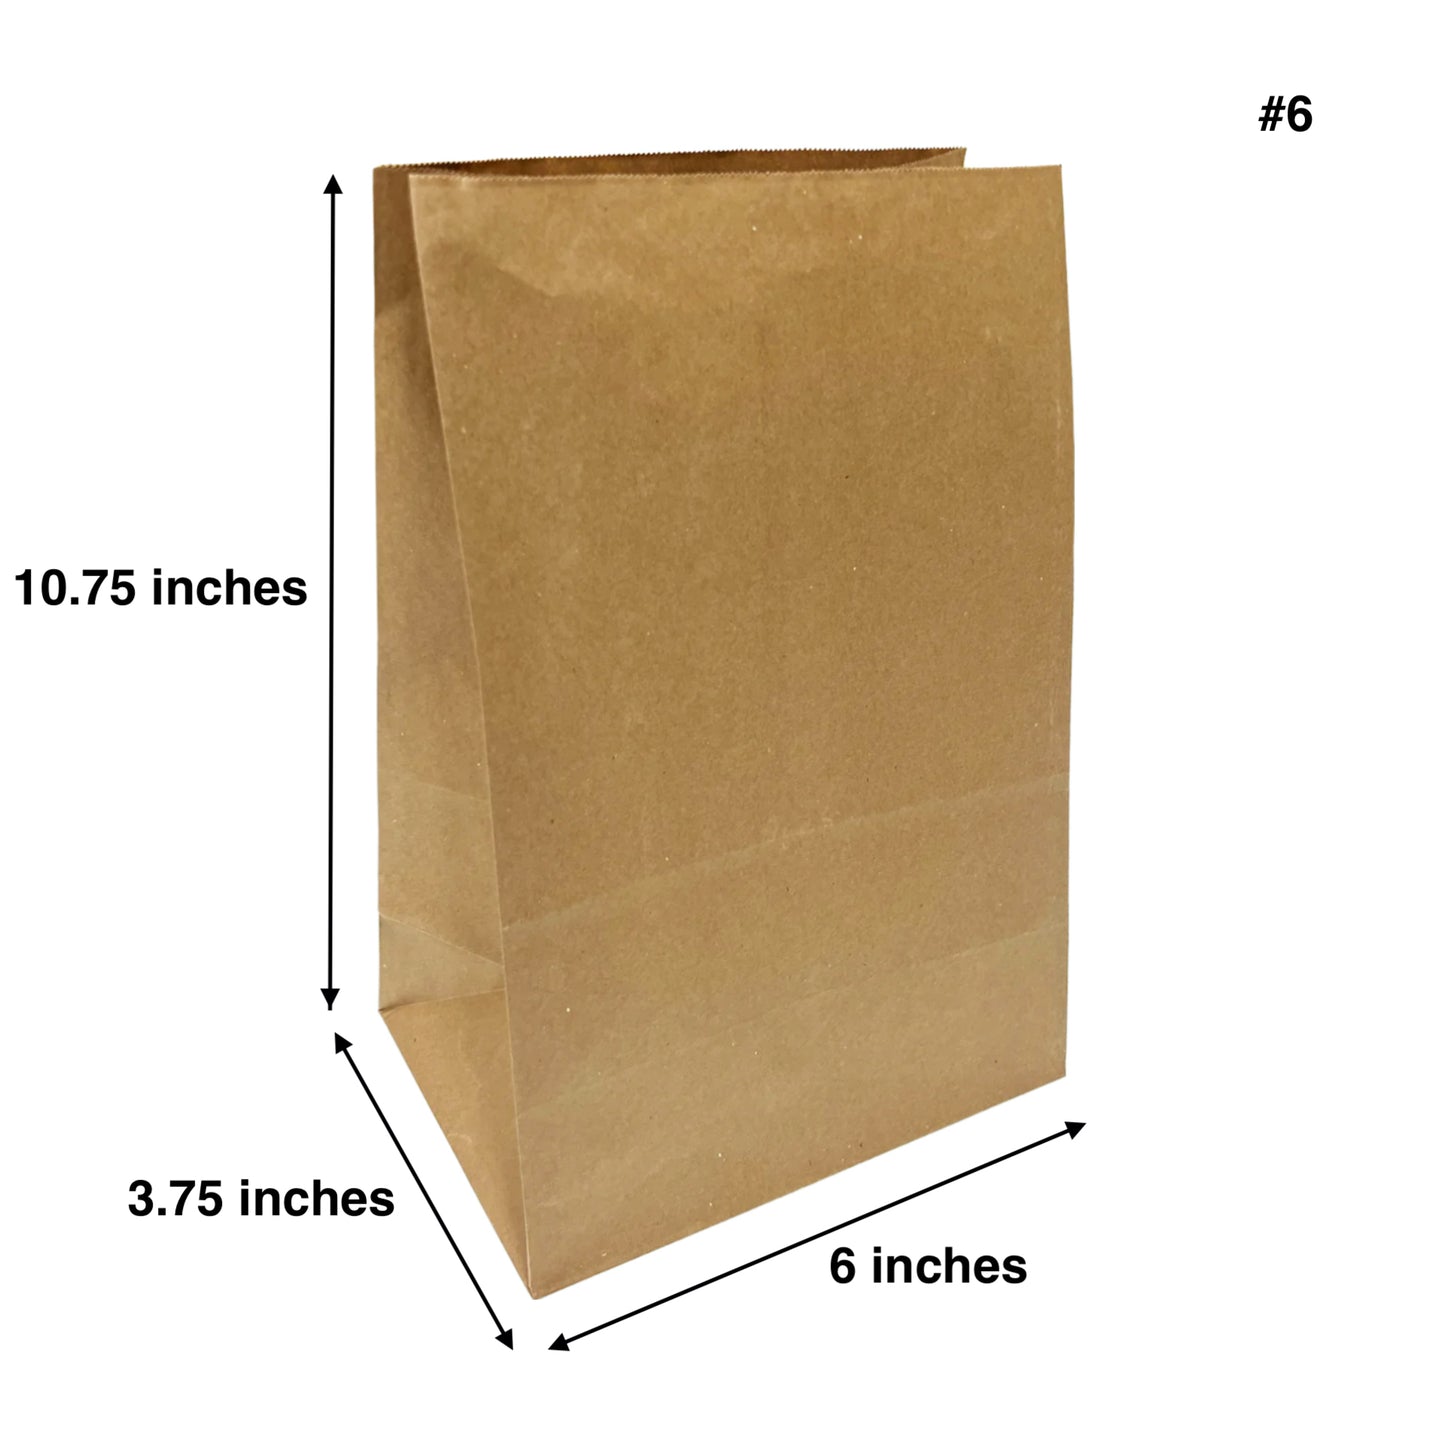 500pcs #6 Grocery Bags 6x3.75x10.75 inches; $0.04/pc